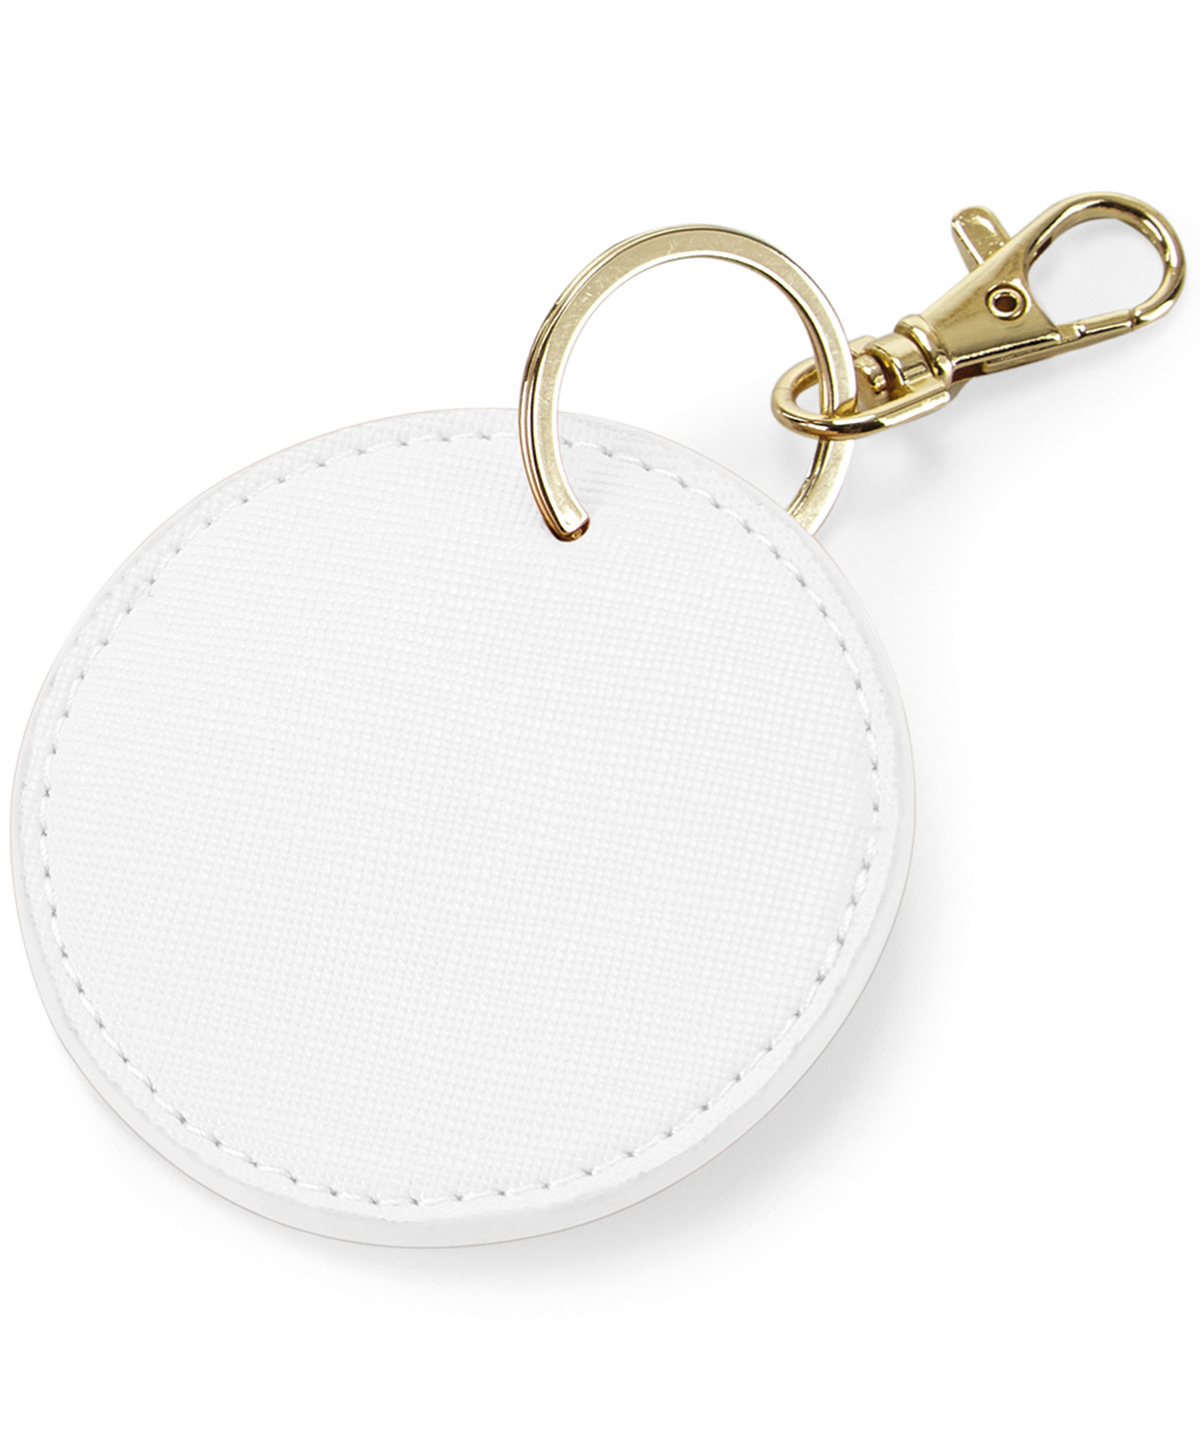 Boutique Circular Keyclip Soft White Size One Size